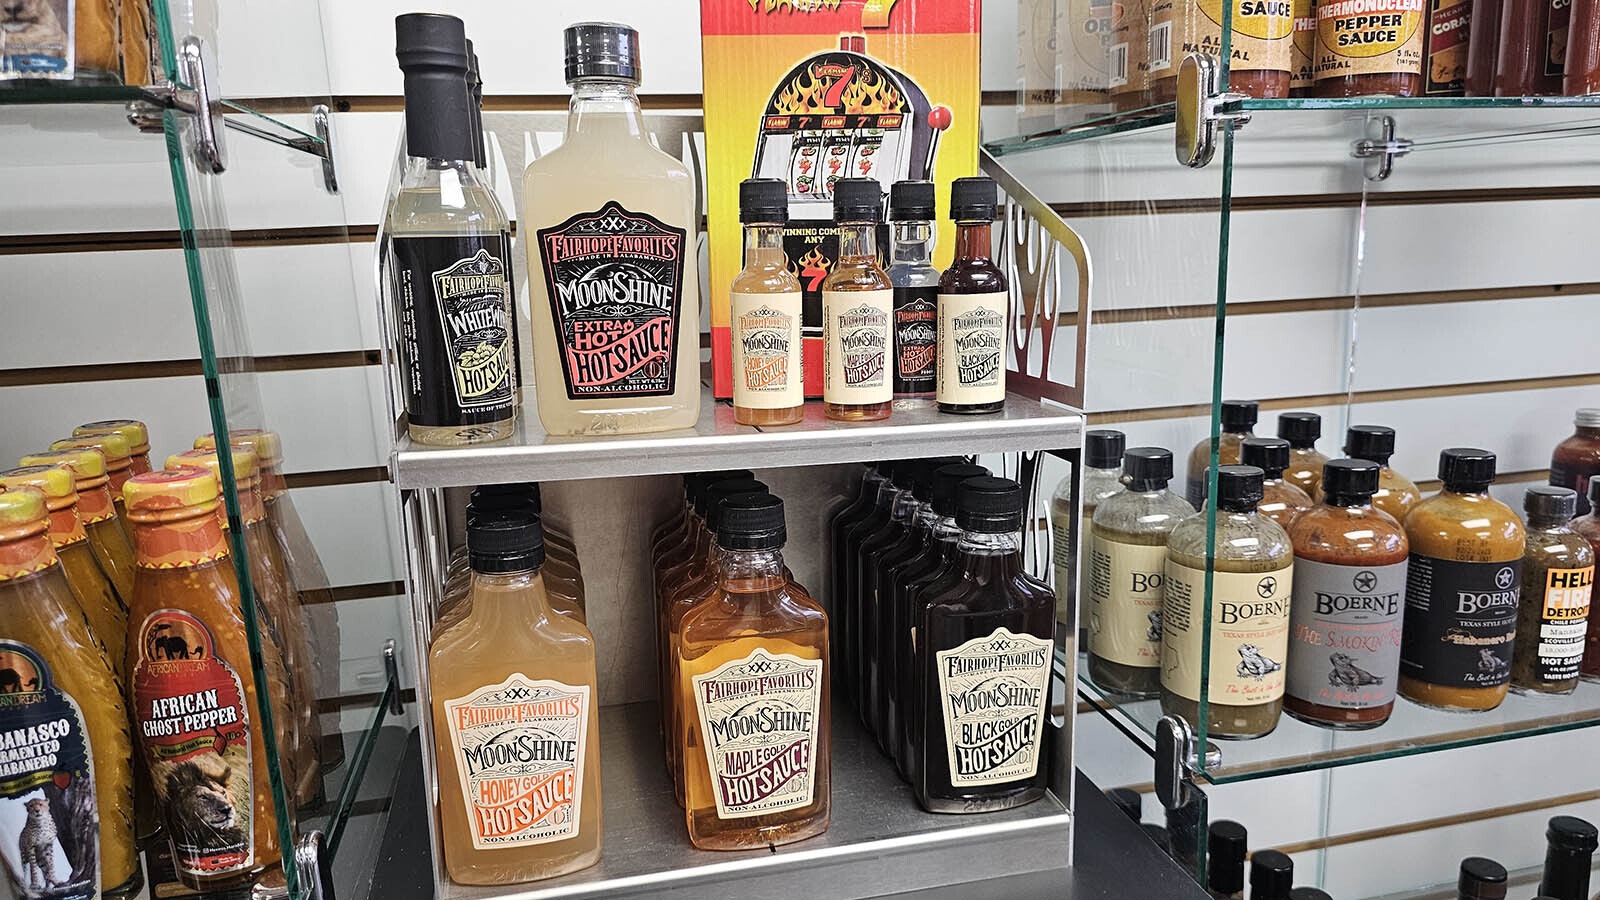 These Moonshine hot sauces aren't very hot, Discover Thermopolis owner Howie Samelson told Cowboy State Daily, but they make good marinades, and are popular.